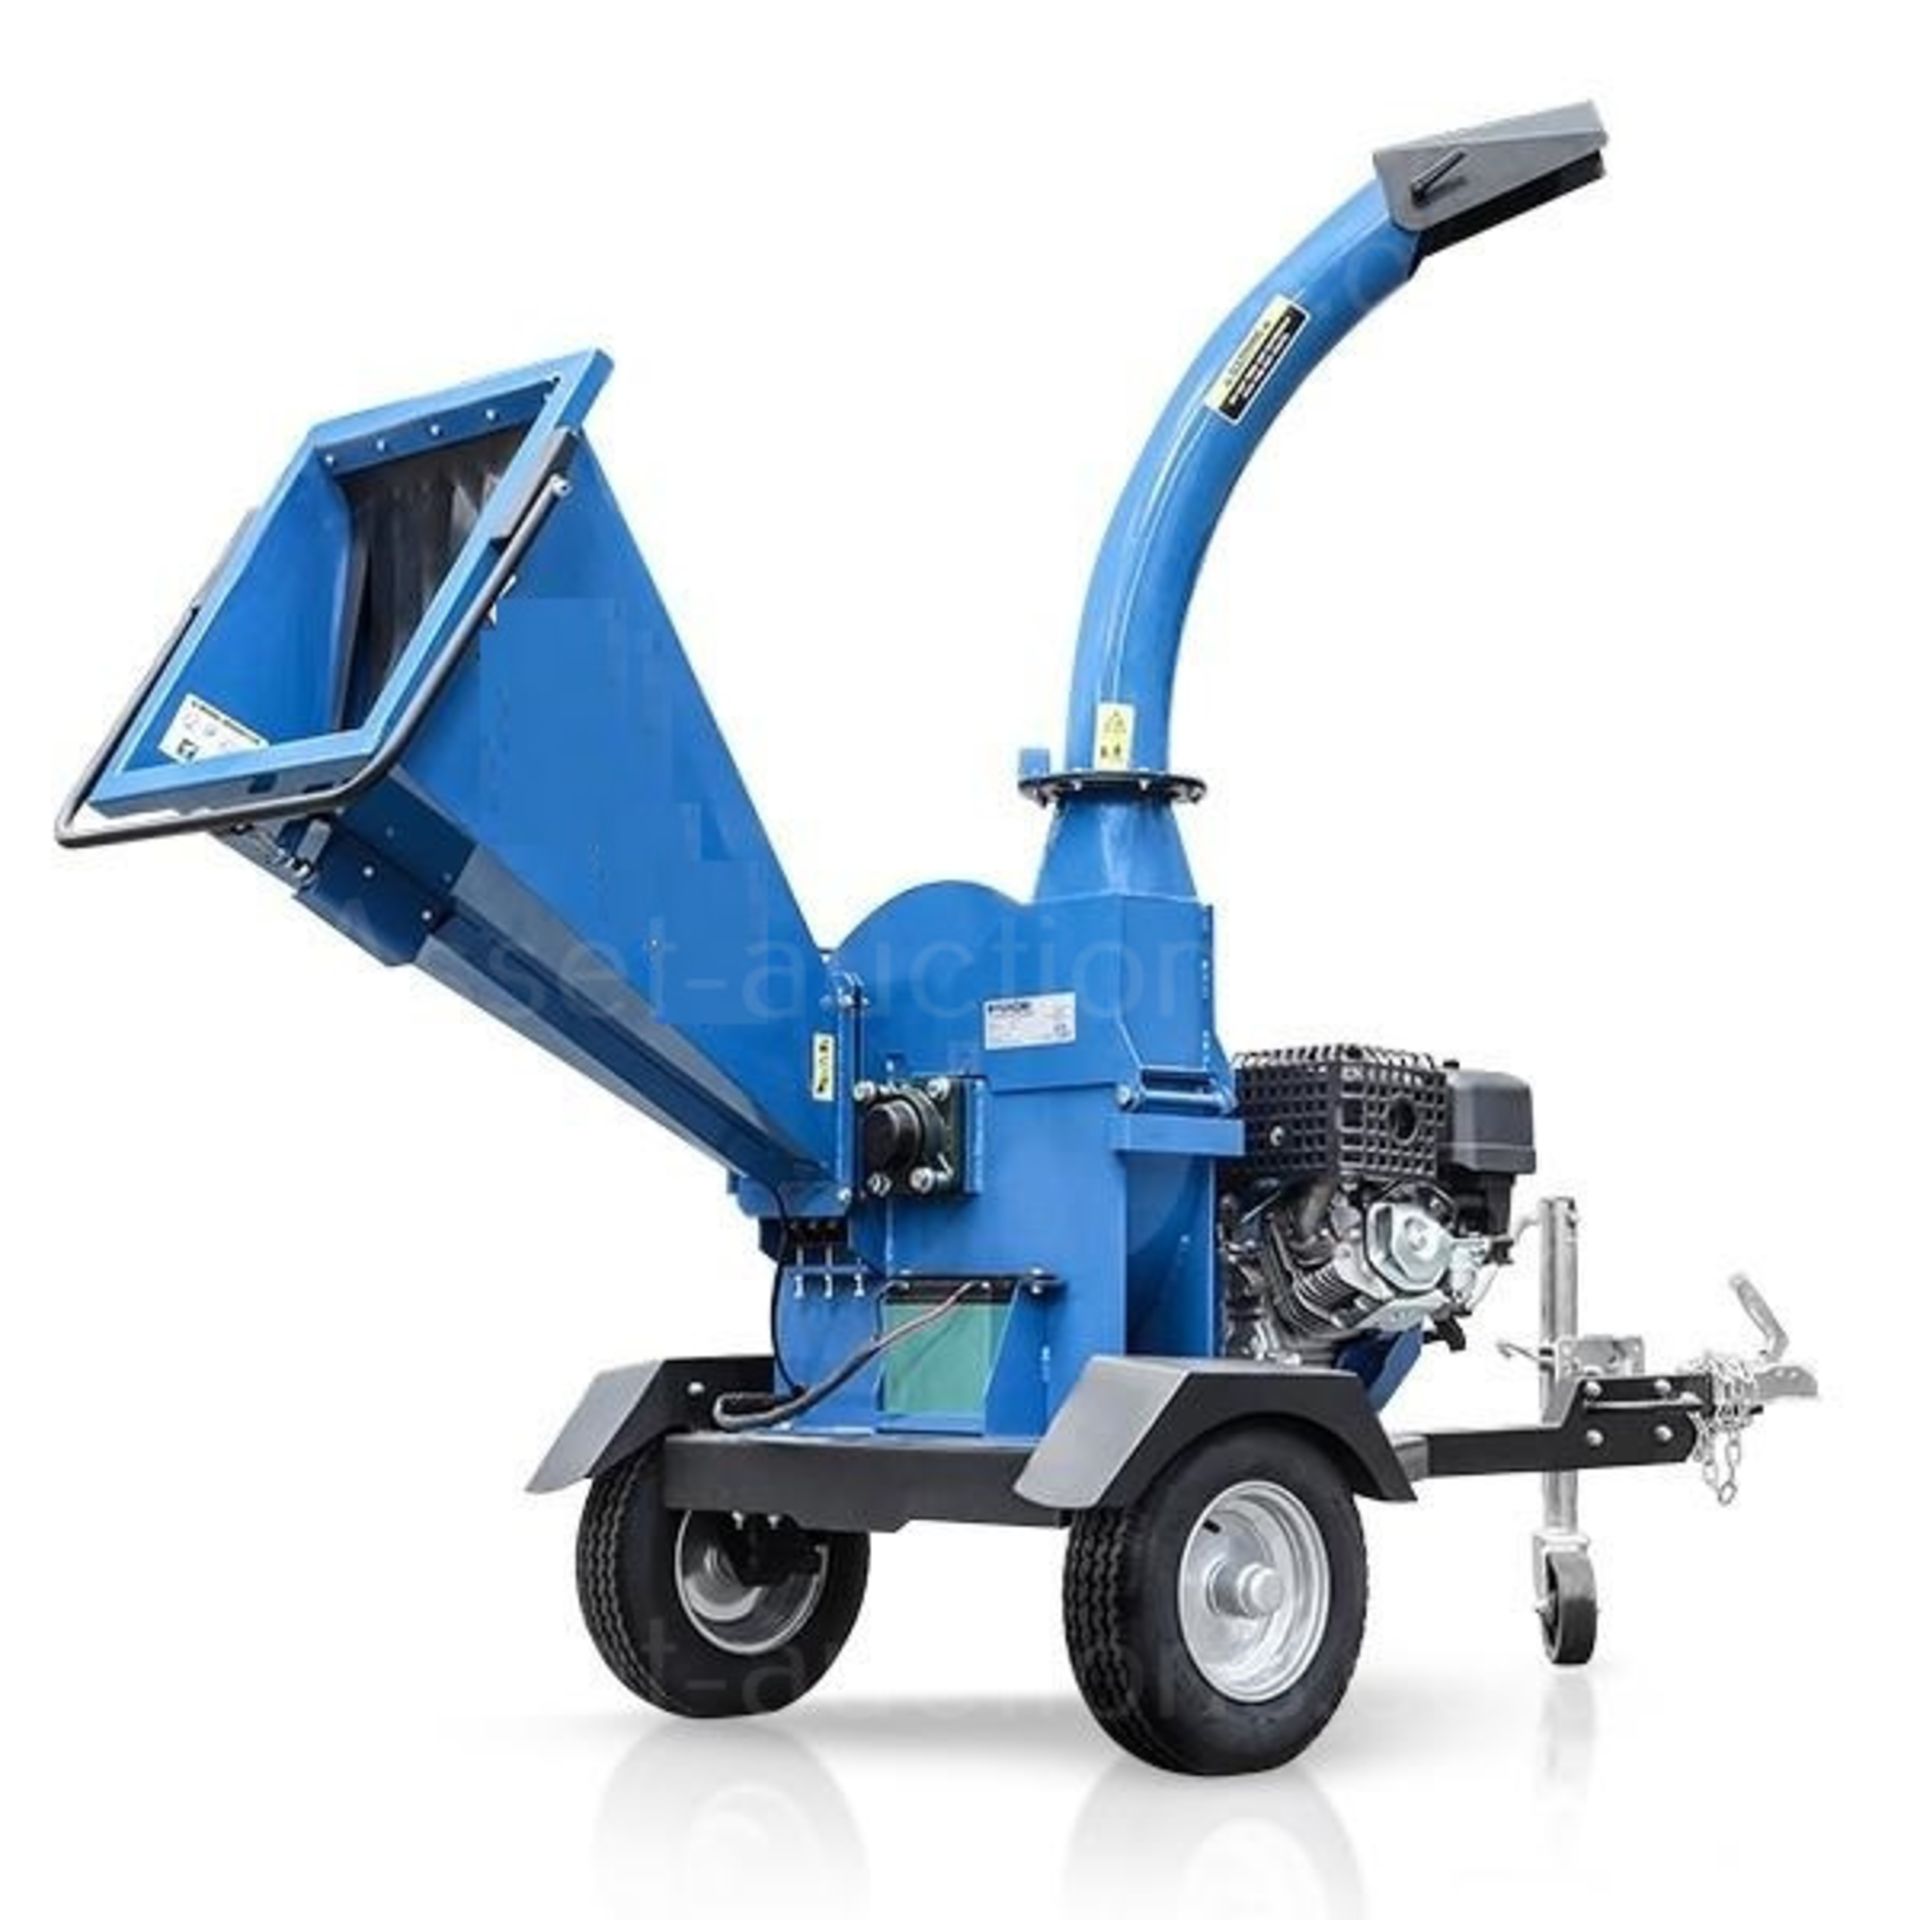 NEW AND UNUSED 15100TE 420cc 4.5" TOWABLE PETROL WOOD CHIPPER, RRP OVER £2400 *PLUS VAT* - Image 8 of 10